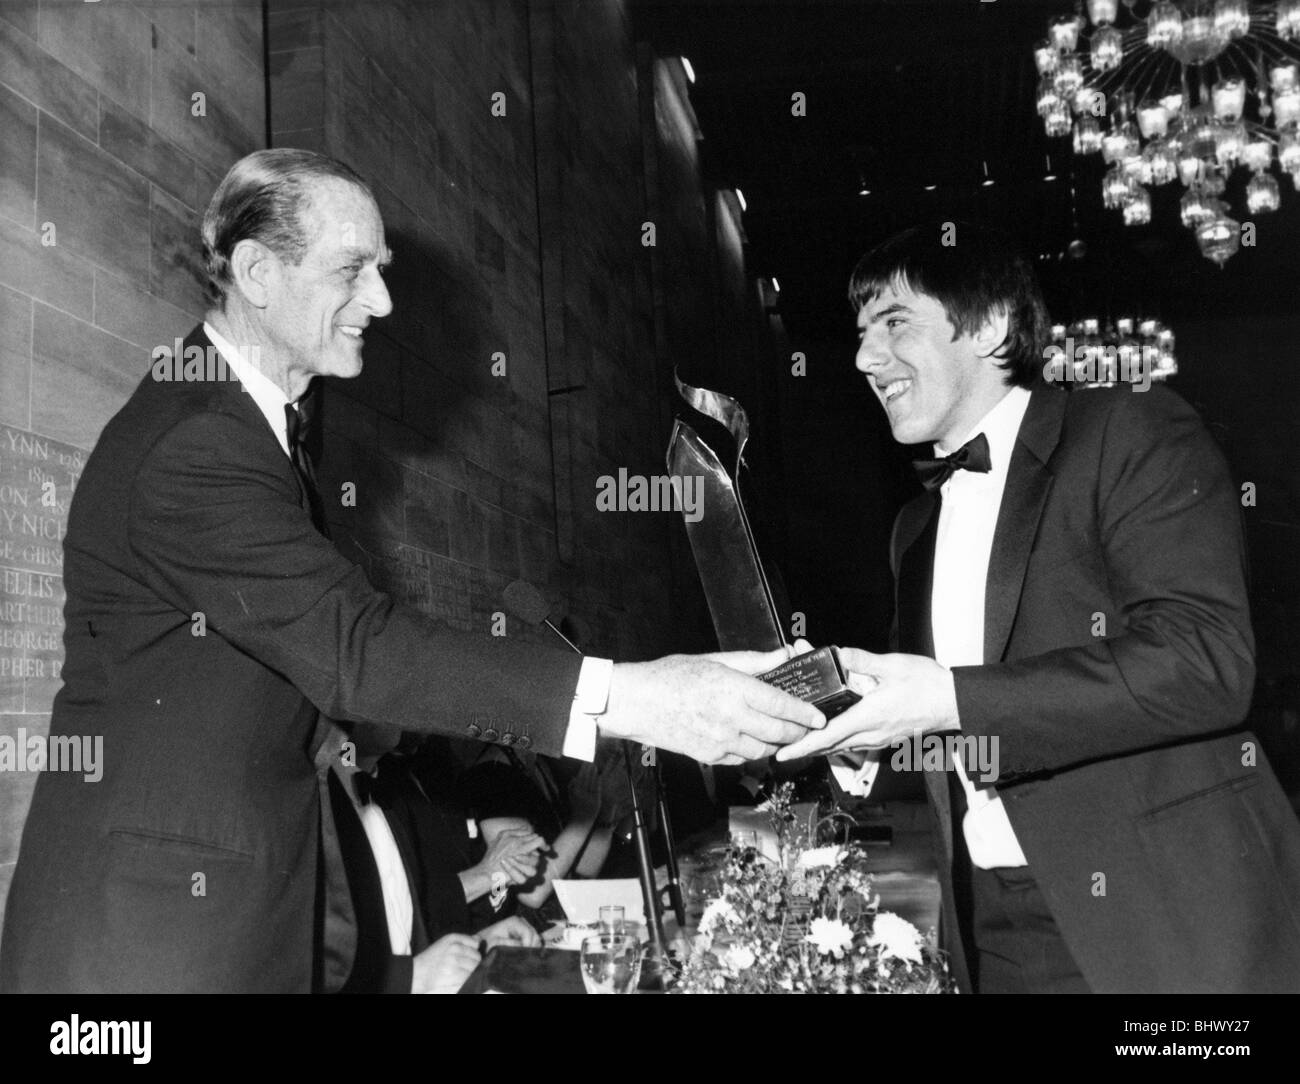 Prince Philip, Duke of Edinburgh, at the Newcastle Sports Council civic dinner at Newcastle Civic Centre, presenting Peter Beardsley with his Sports Personality of the Year award Peter receiving the North East Sports Personality of the Year award at Newcastle Civic Centre from HRH Prince Philip in 1987. There were plenty more honours to follow for Beardsley. Stock Photo